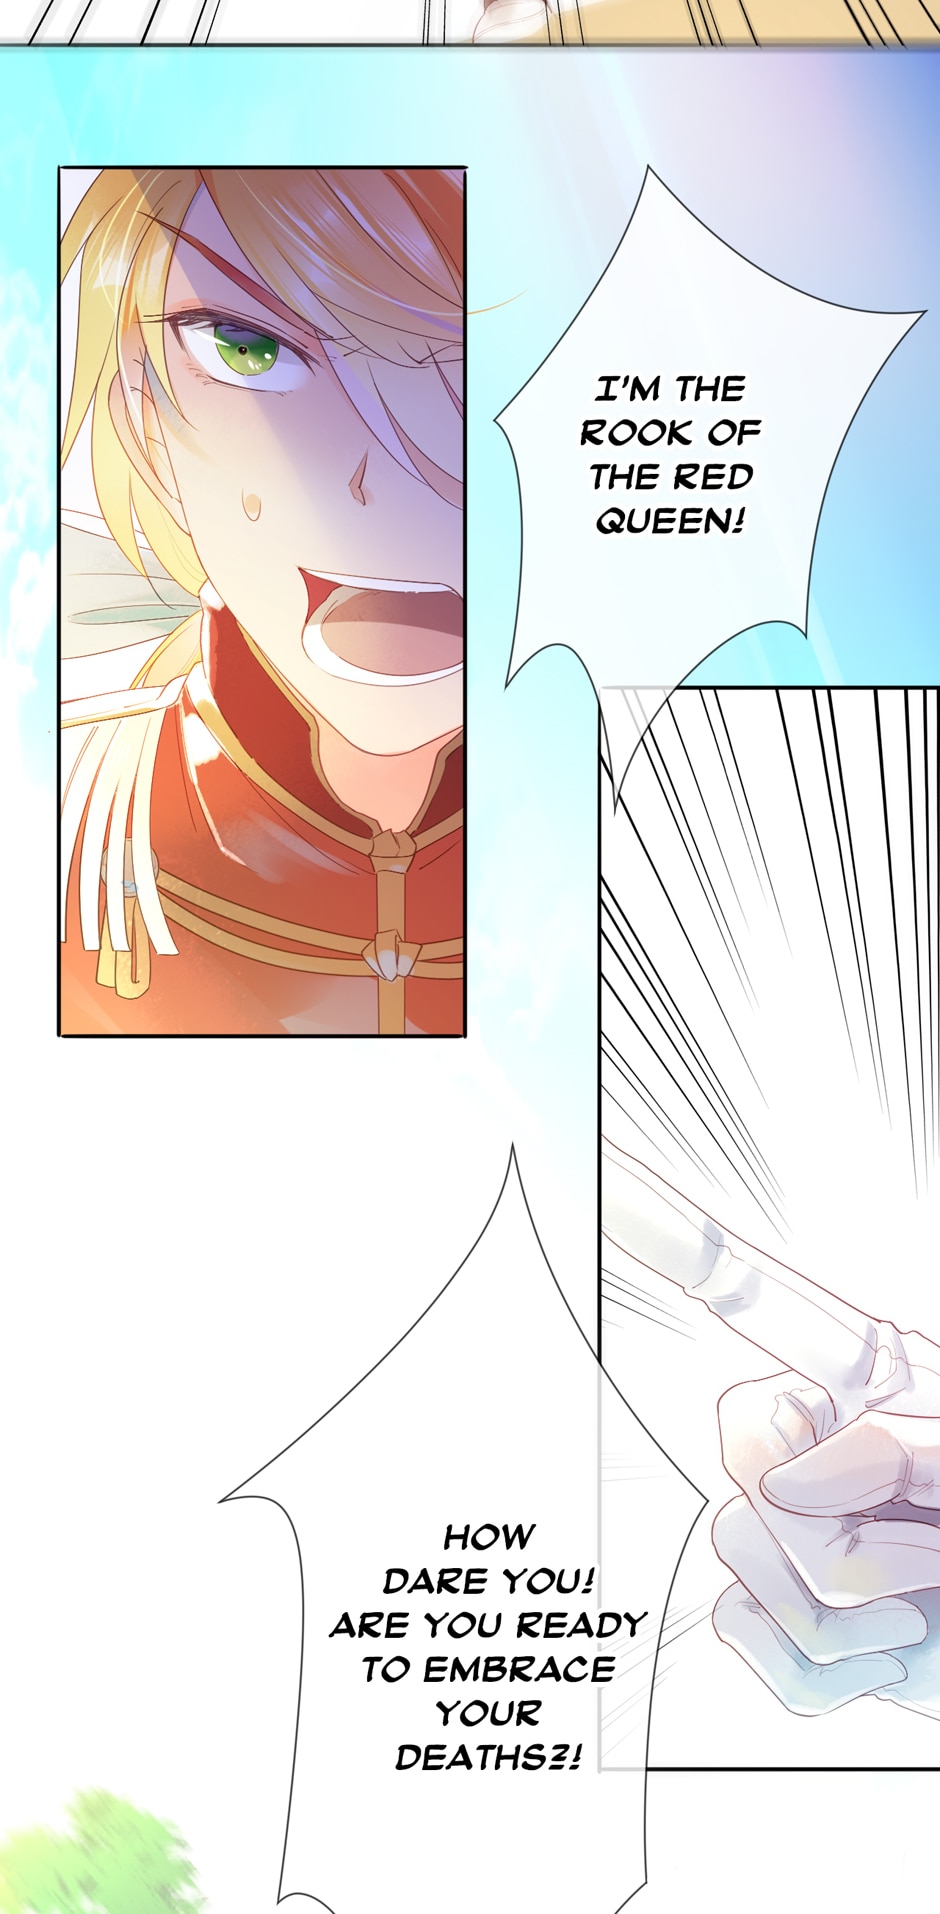 The Queen's Knights Ch.5